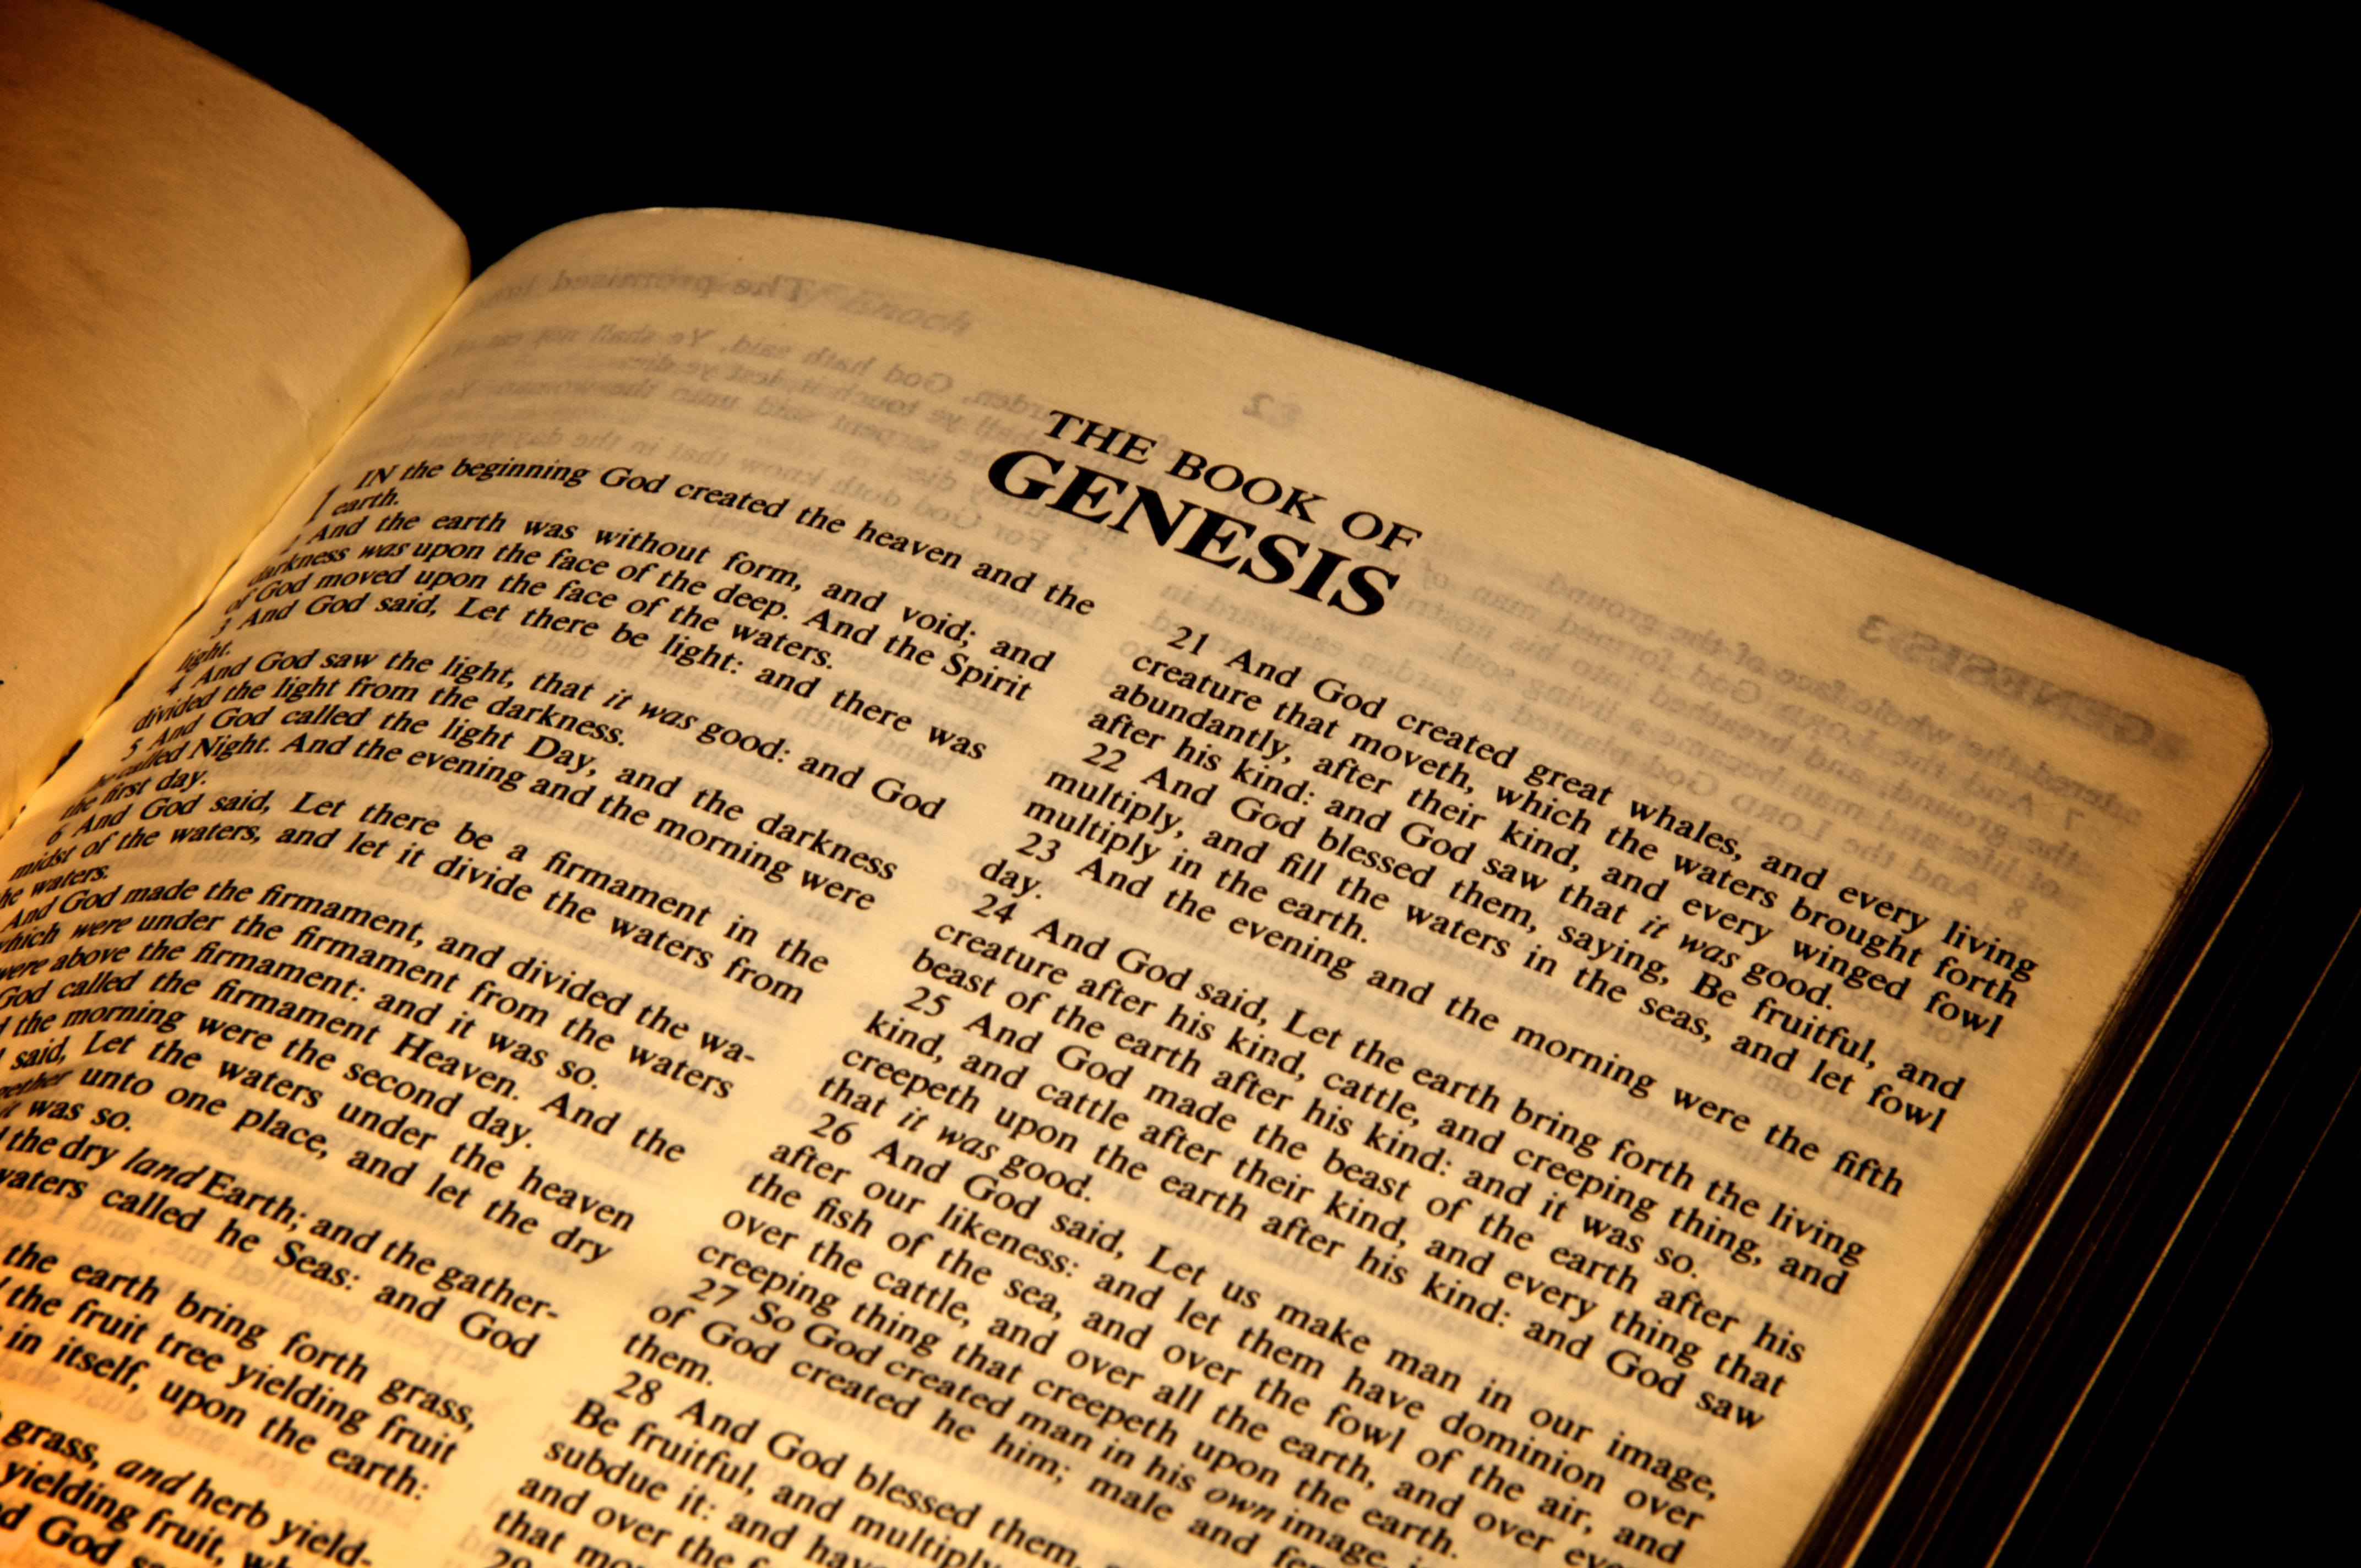 The Bible Calls For Moral Action on Climate Change | Sojourners